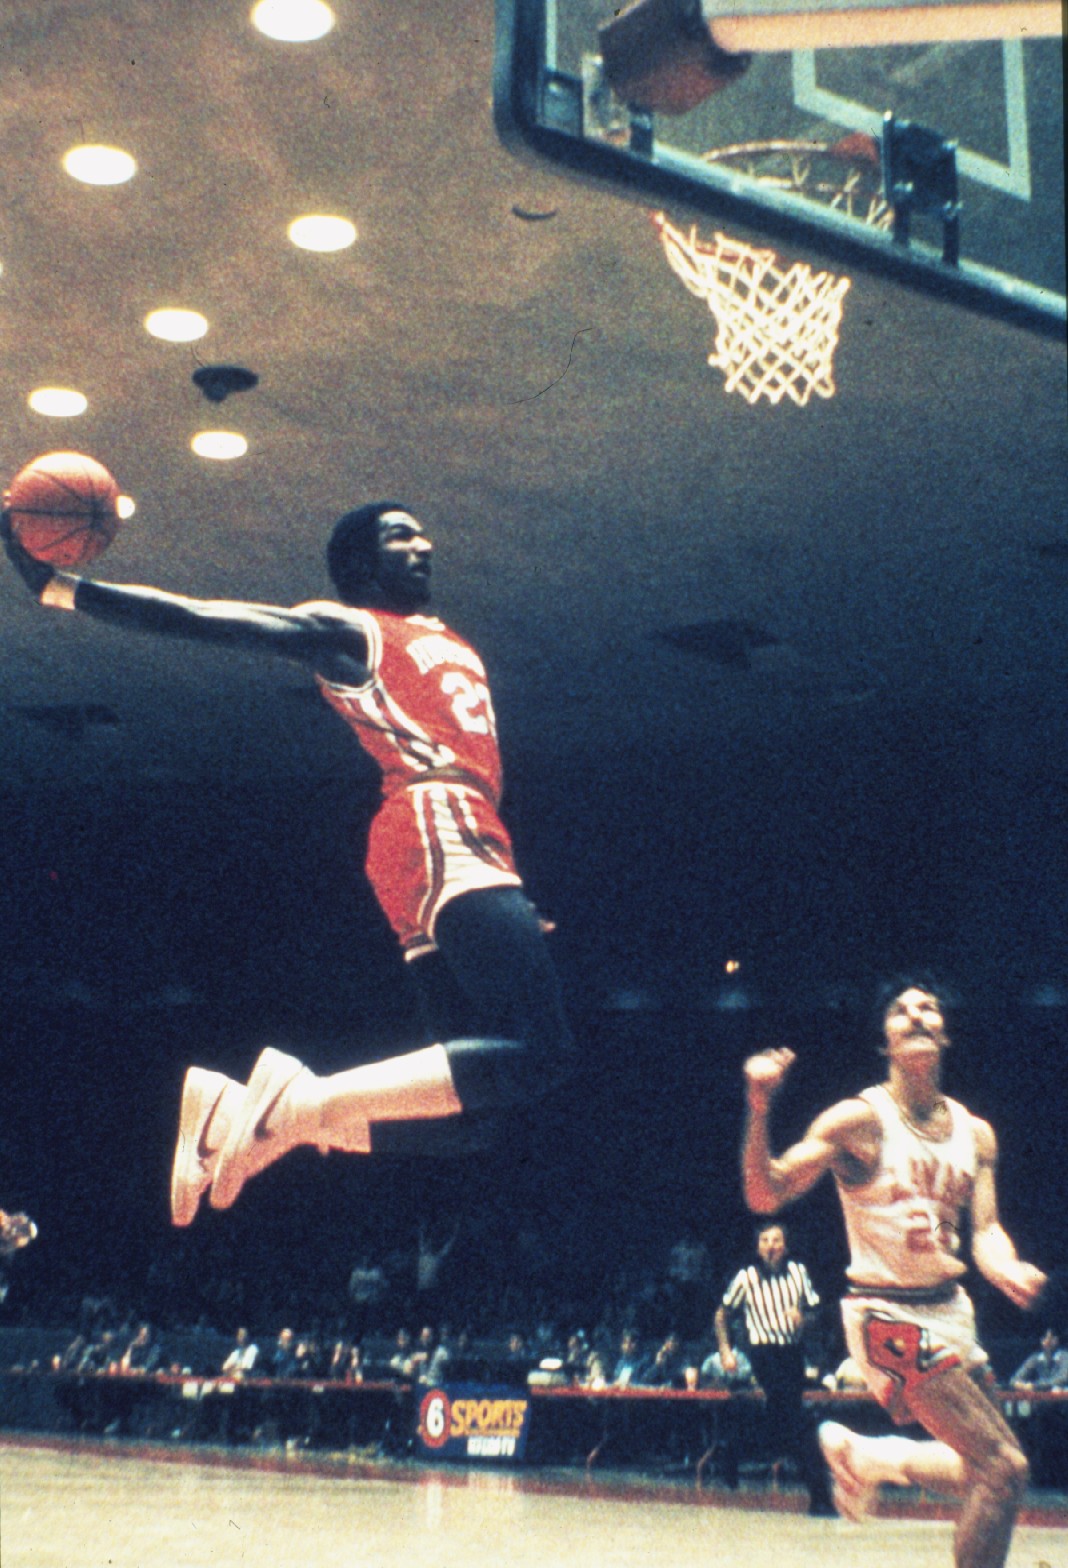 Guard Clyde "The Glide" Drexler soaring through the air for a dunk. He was an instrumental piece for the "Phi Slama Jama" team.